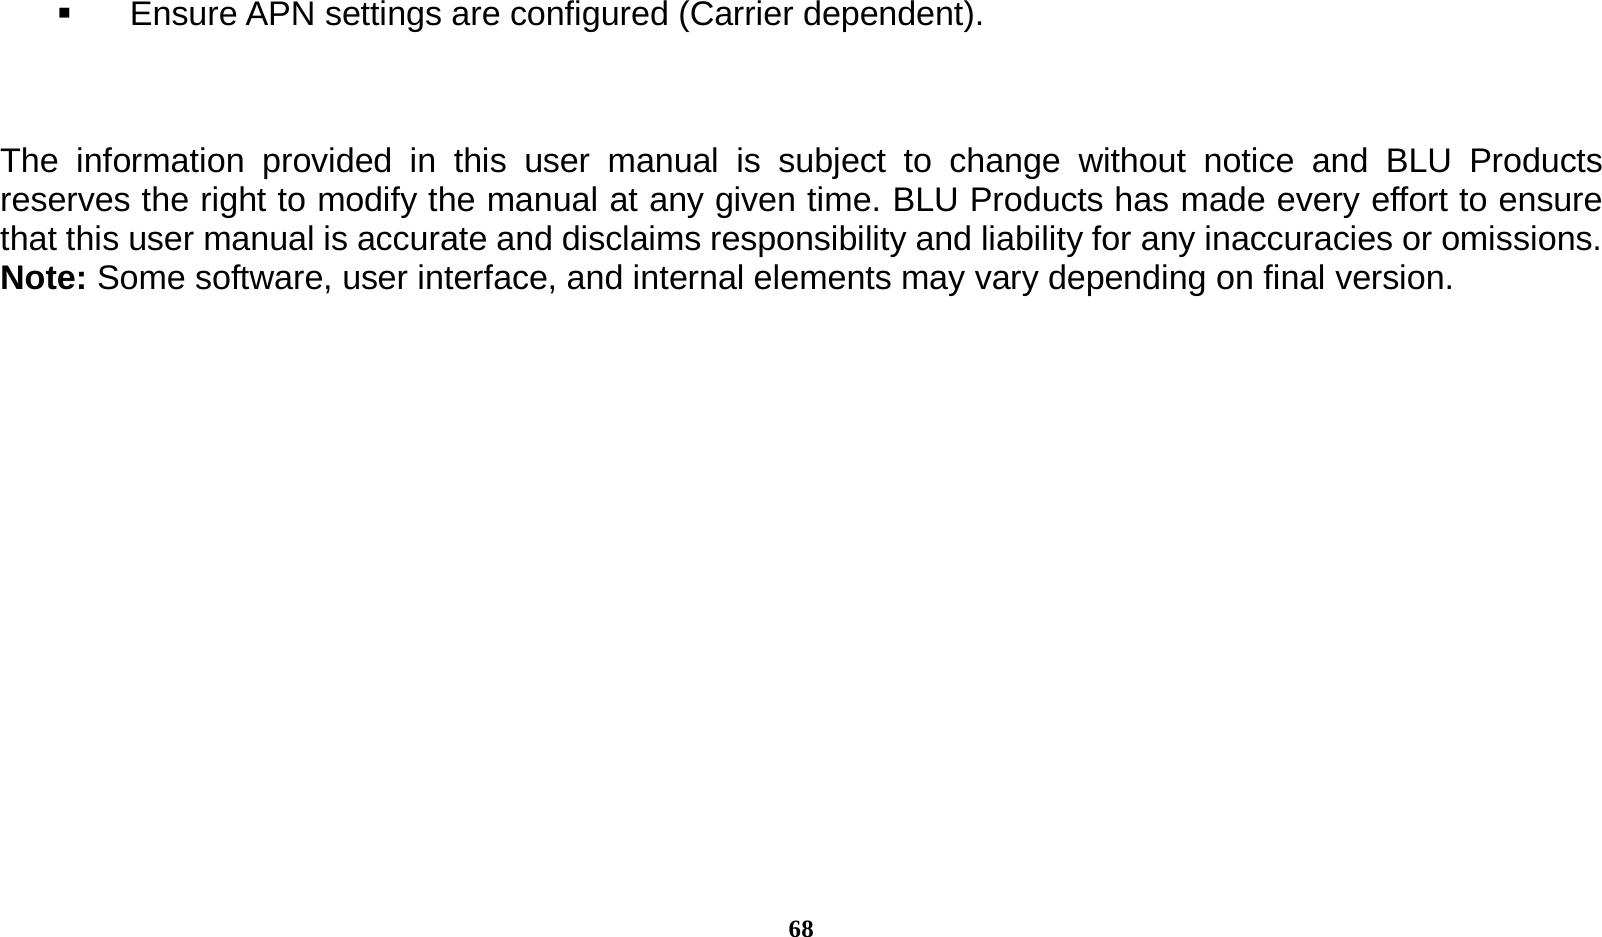  68   Ensure APN settings are configured (Carrier dependent).   The information provided in this user manual is subject to change without notice and BLU Products reserves the right to modify the manual at any given time. BLU Products has made every effort to ensure that this user manual is accurate and disclaims responsibility and liability for any inaccuracies or omissions. Note: Some software, user interface, and internal elements may vary depending on final version.   